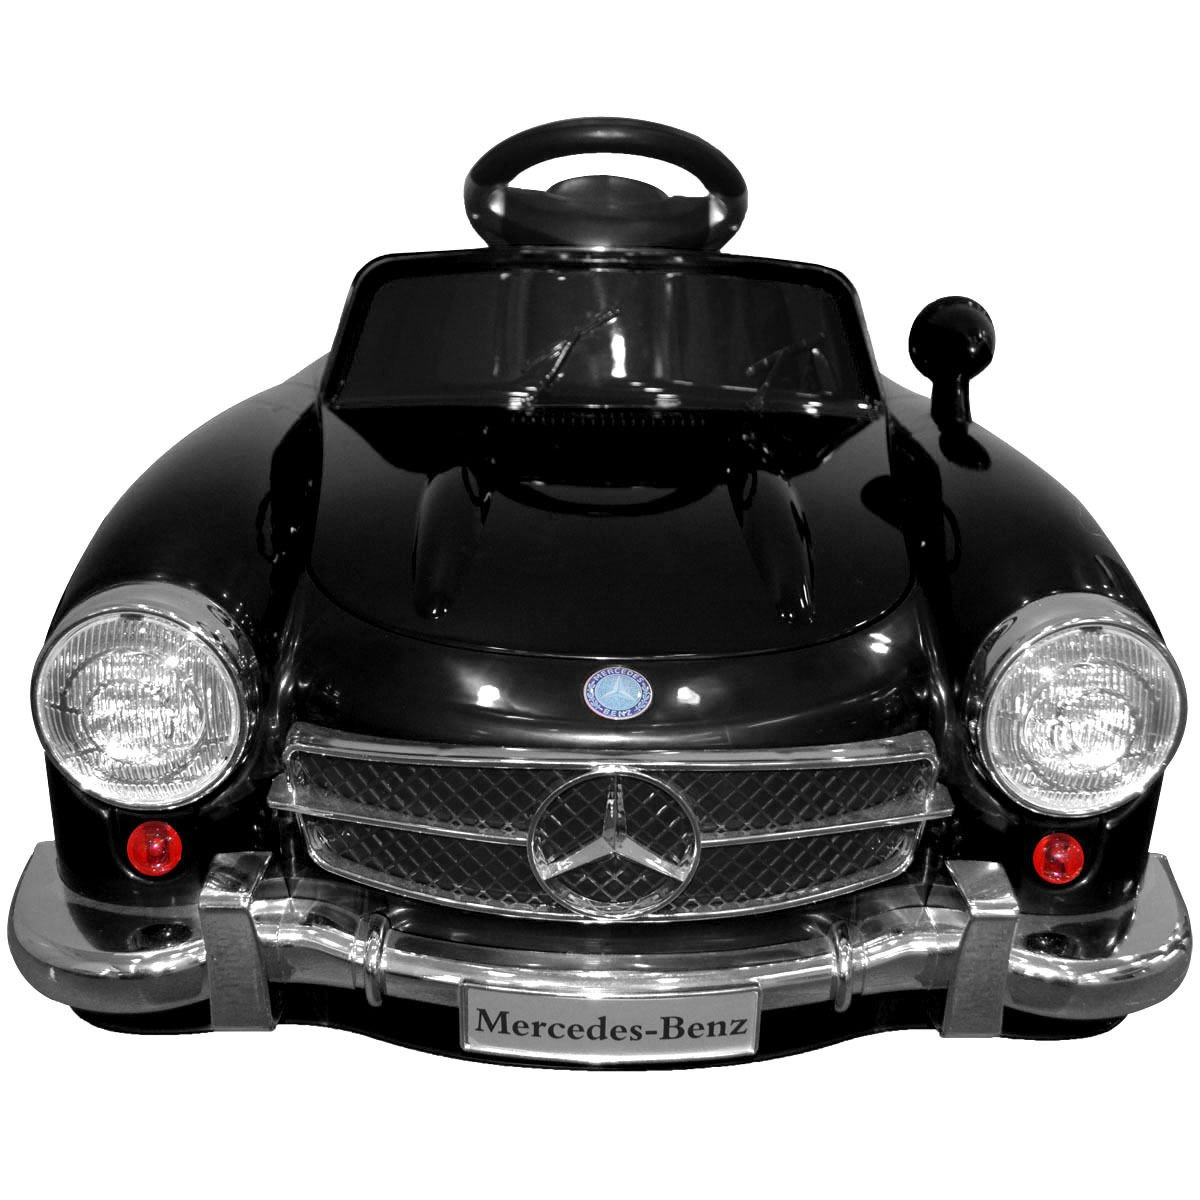 Giantex Car for Kids Mercedes Benz R/C 300SL, Ride-On Vehicles with MP3 Music Function